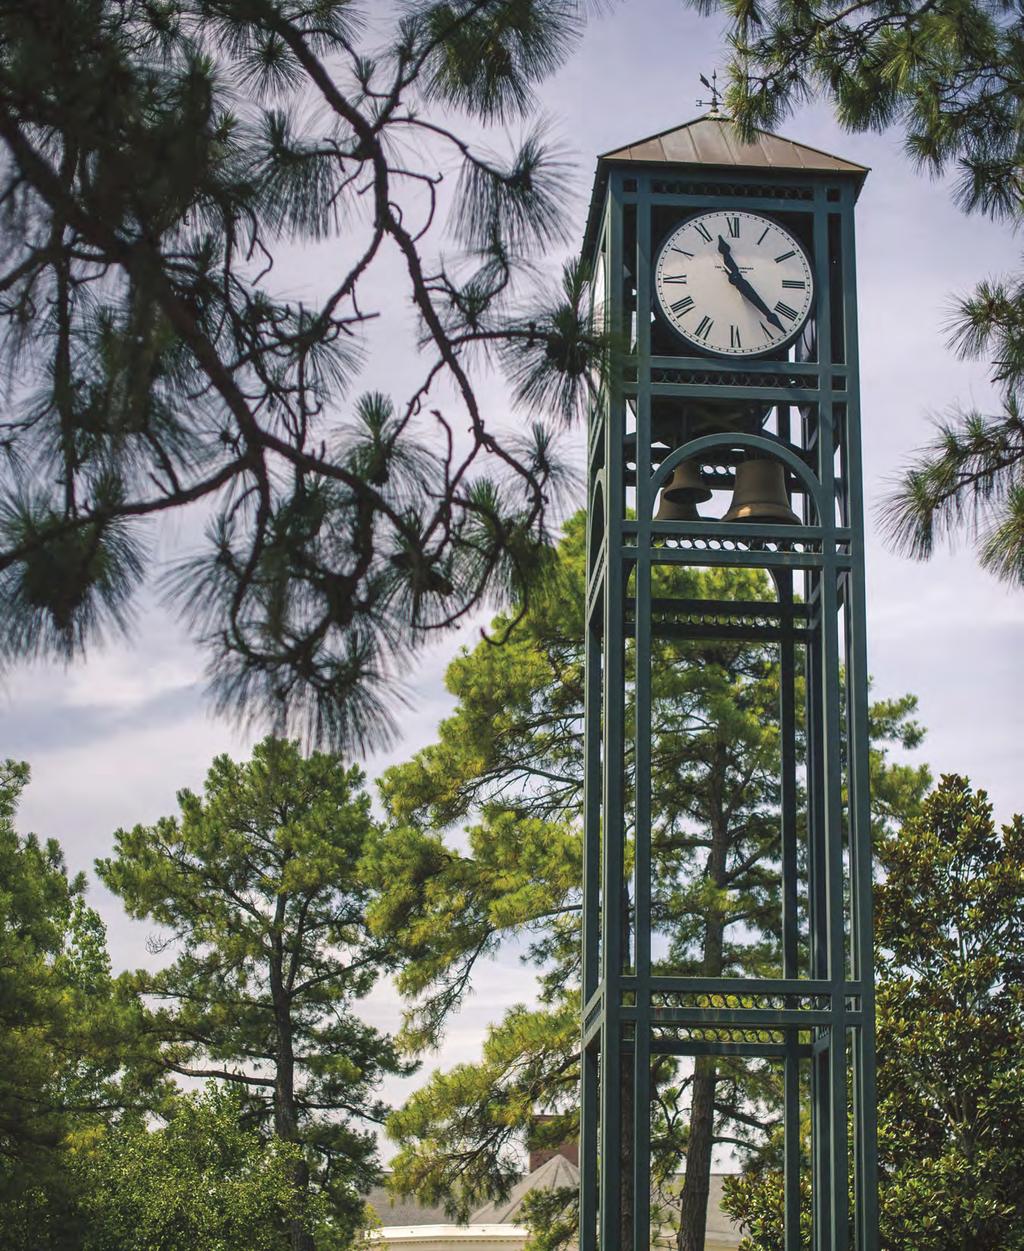 The University of North Carolina Wilmington is committed to and will provide equal educational and employment opportunity for all persons regardless of race, sex, age, color, gender, national origin,